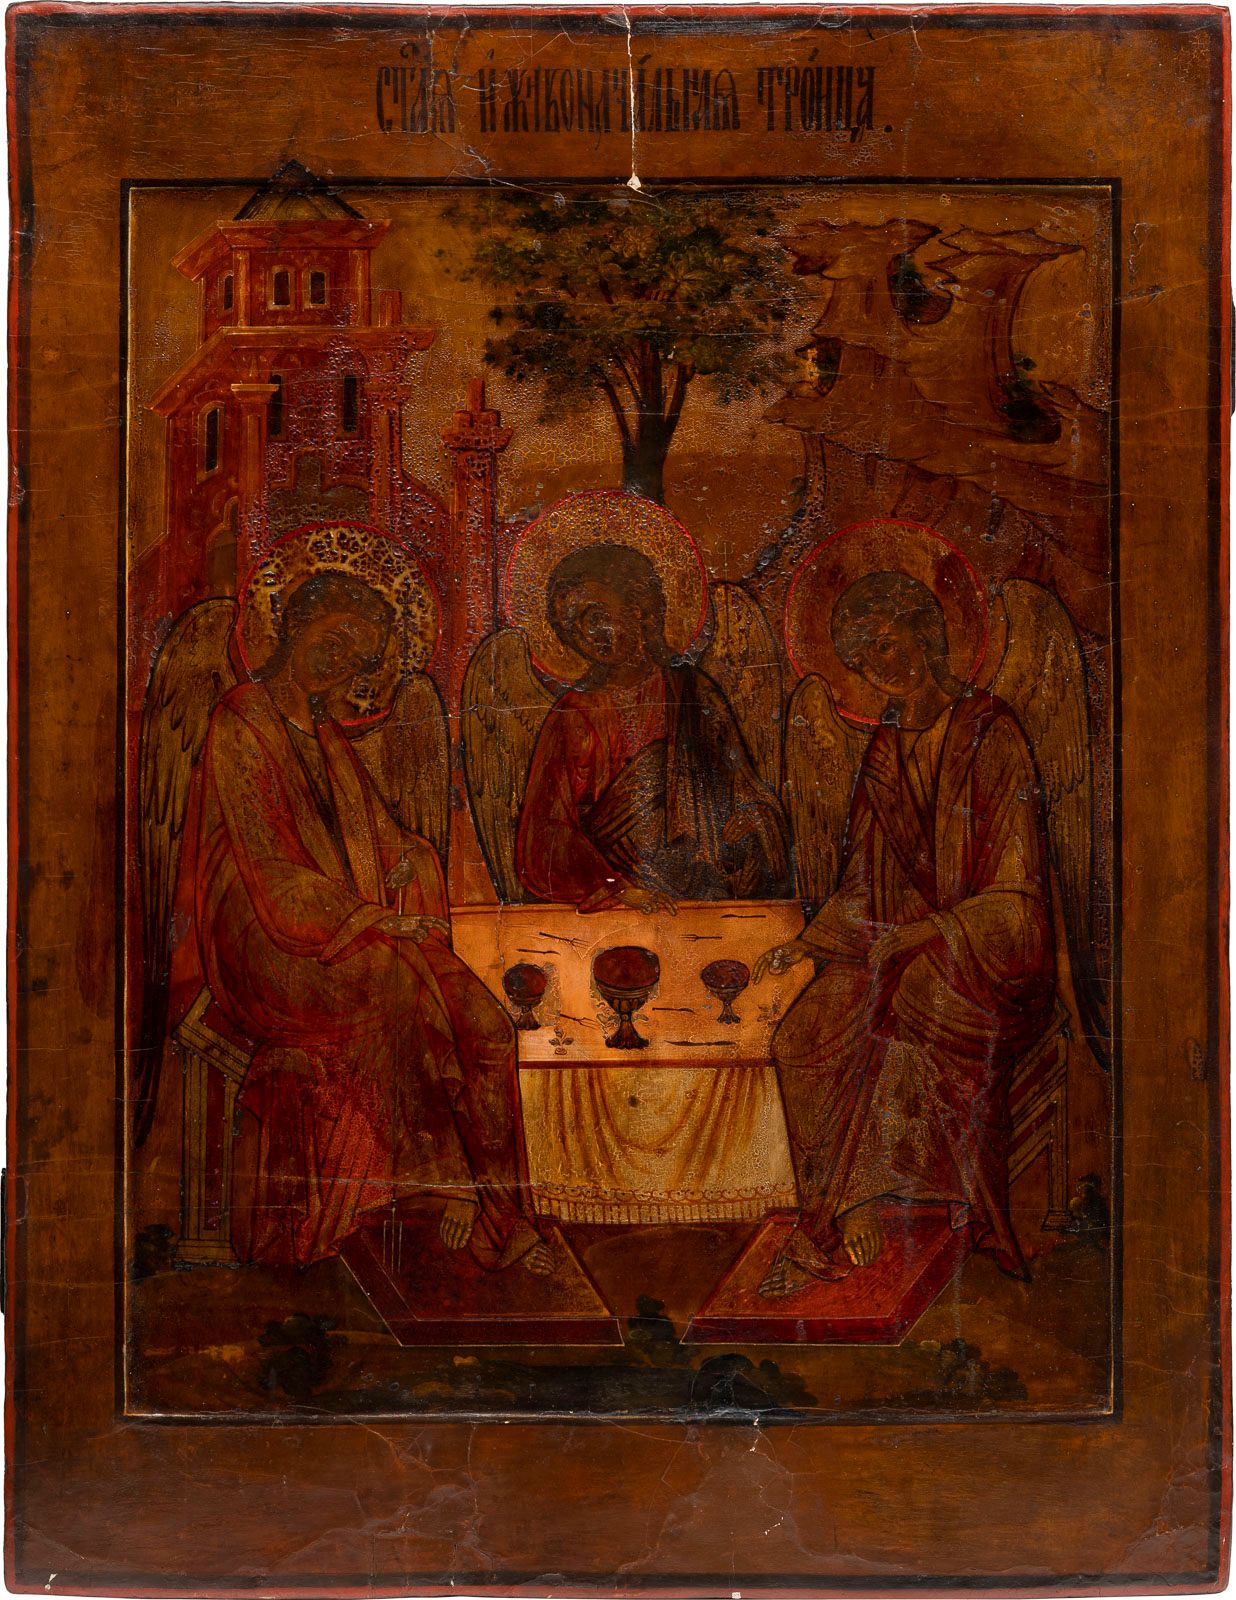 A MONUMENTAL ICON SHOWING THE OLD TESTAMENT TRINITY FROM A ICONO MONUMENTAL QUE &hellip;